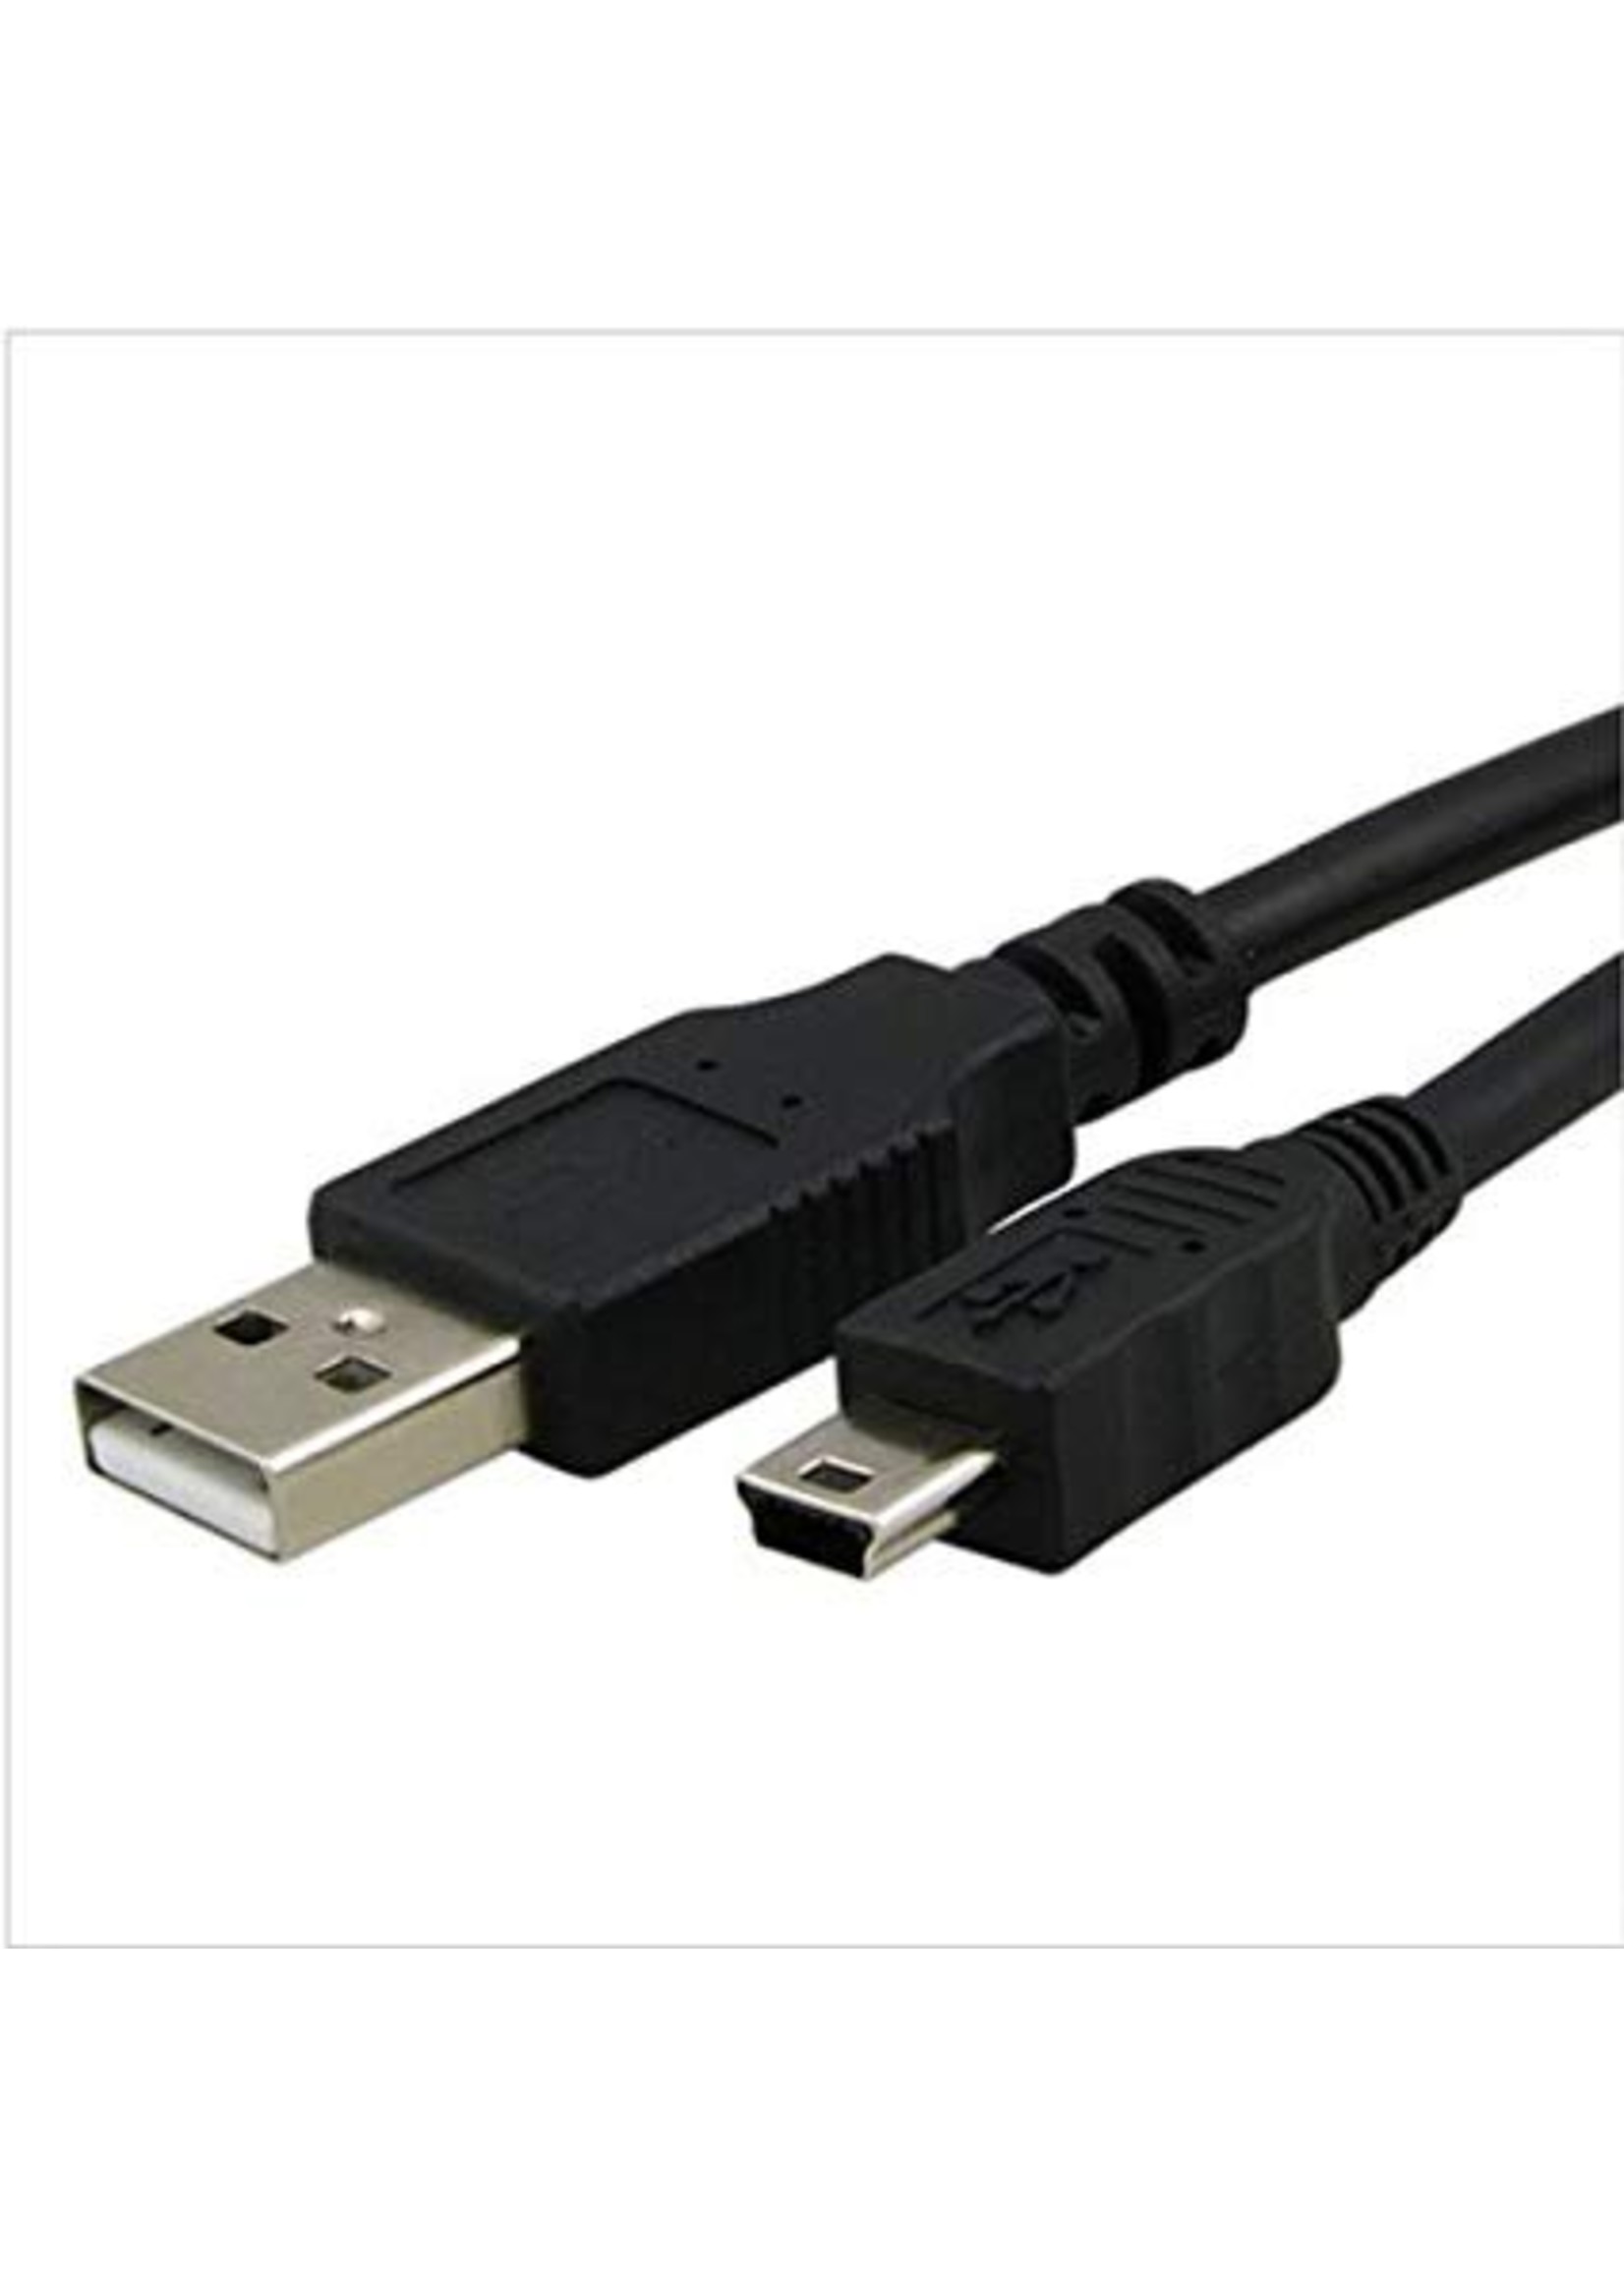 PSP/PS3 Link/Charge Mini USB Cable - 3FT